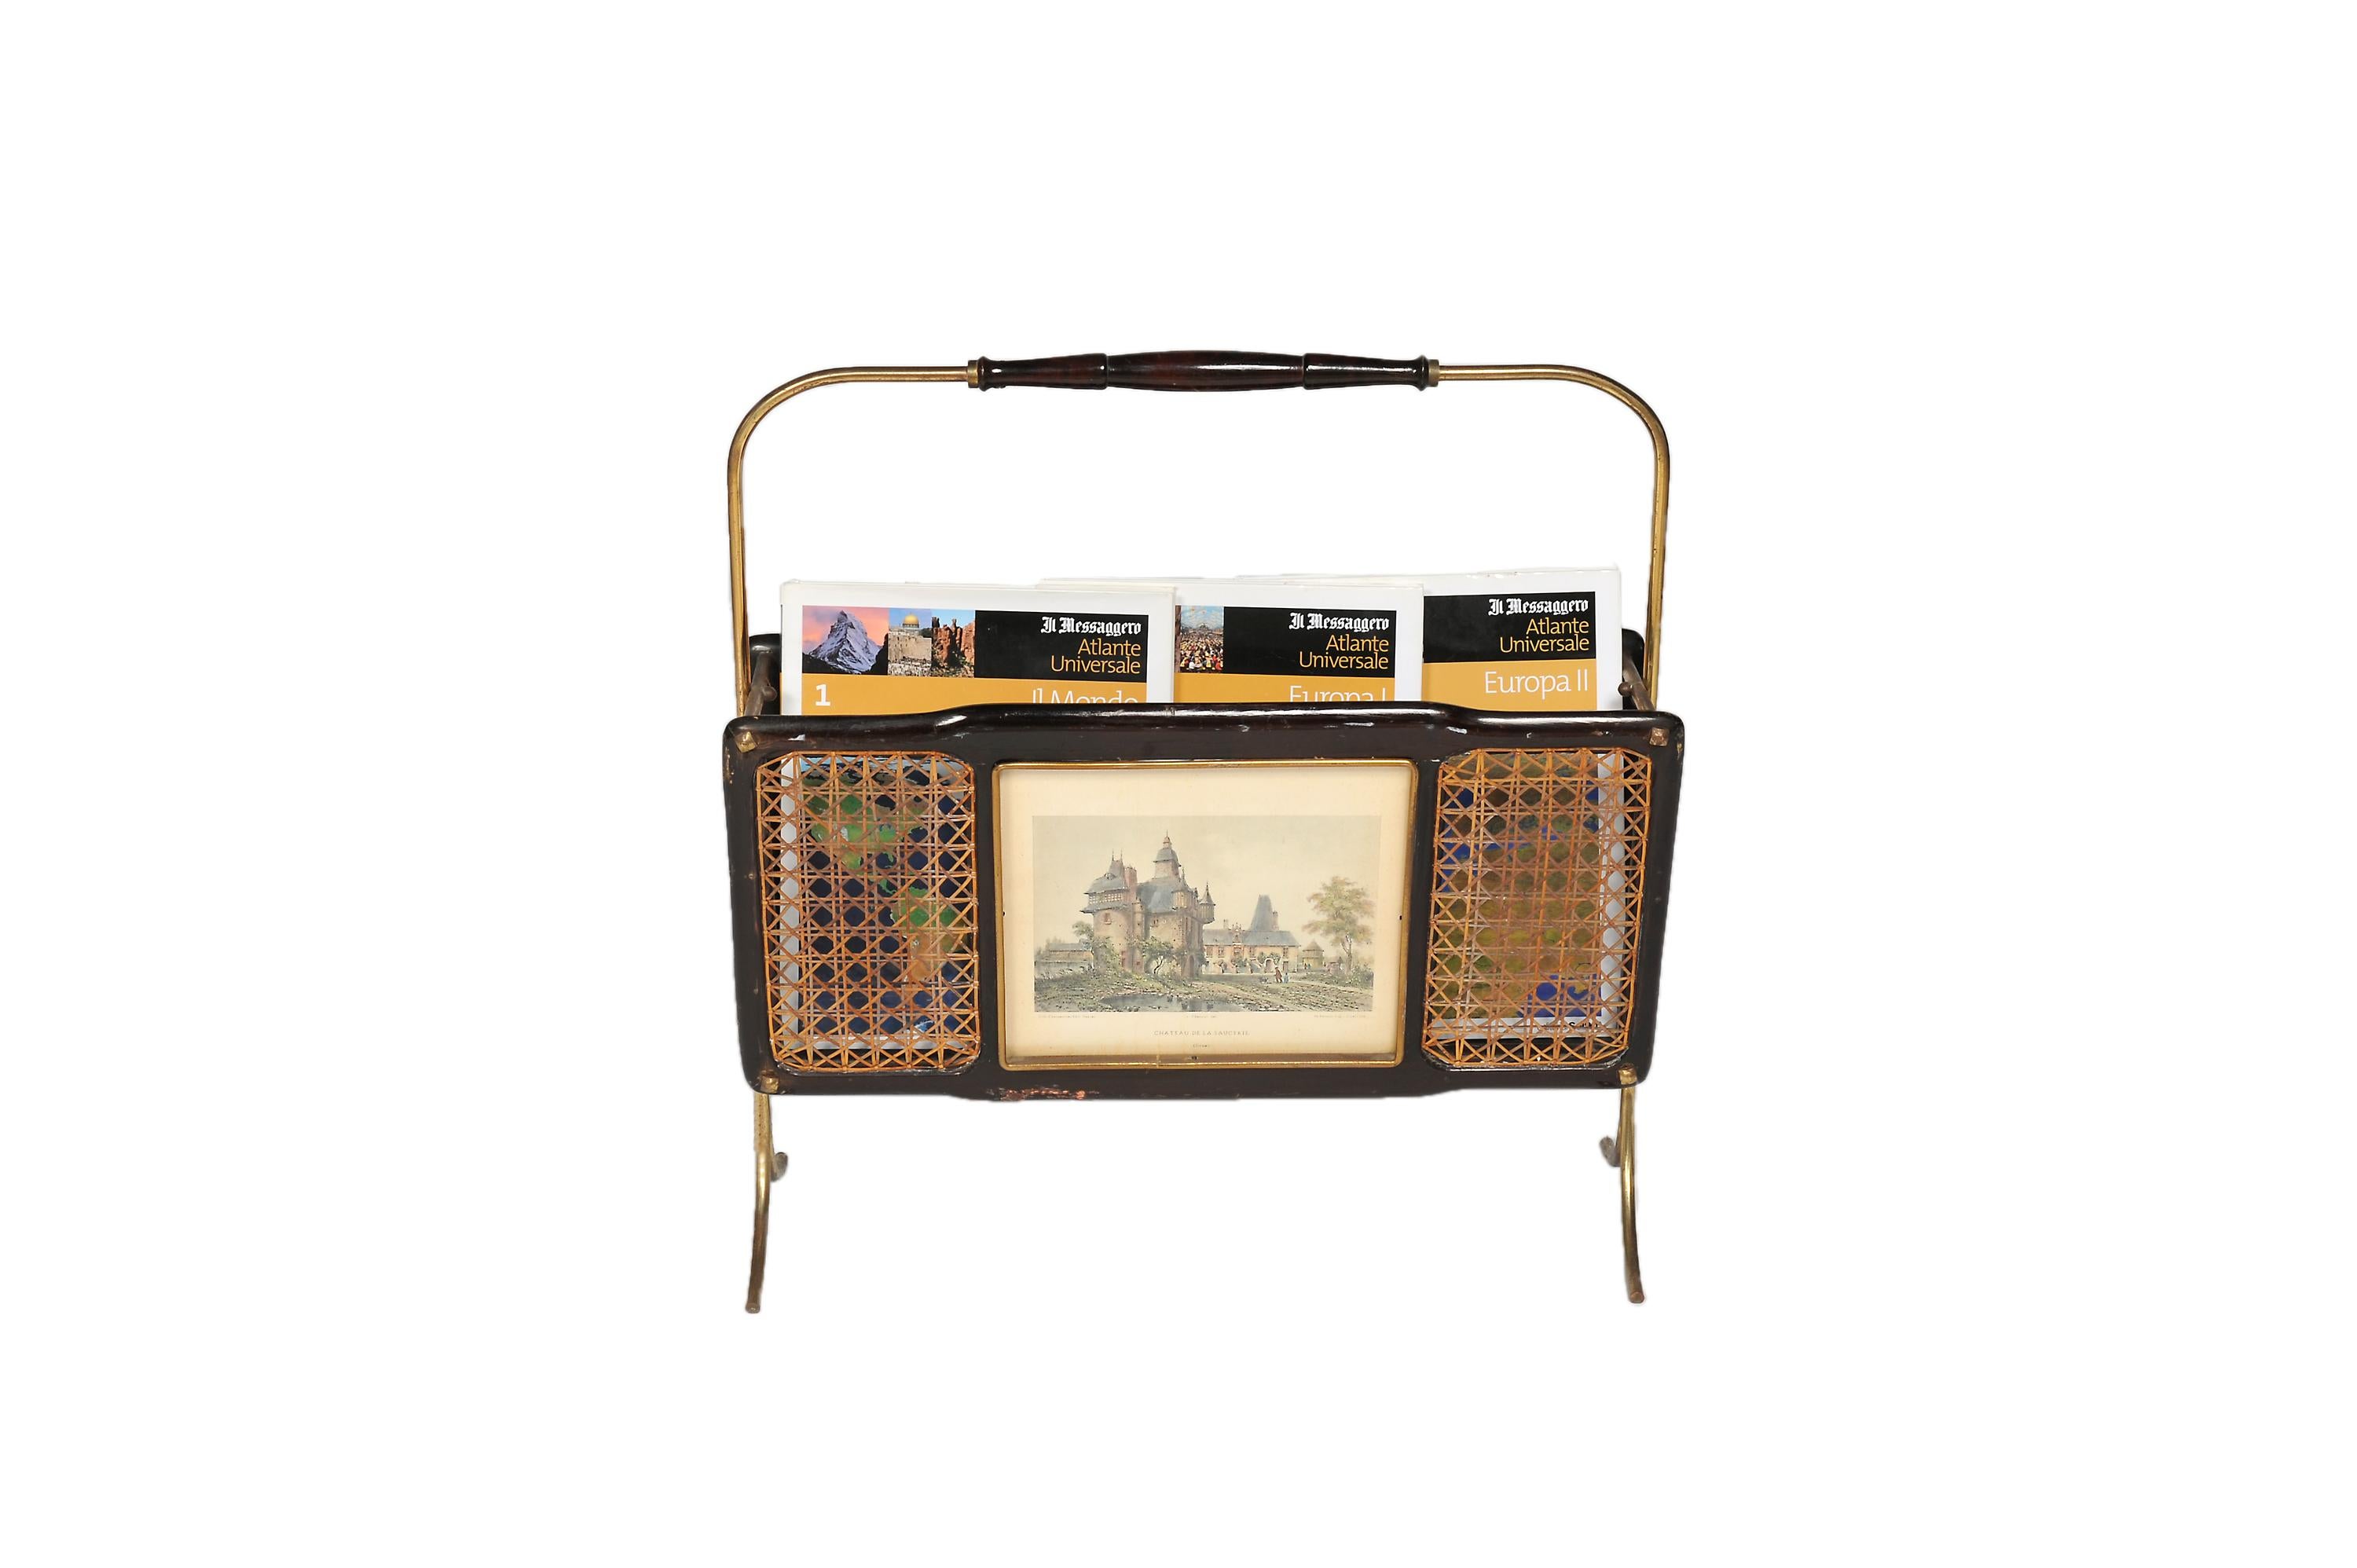 Elegant piece of the typical midcentury Italian style, a perfect union of wood, brass and wicker. Each side of the markets rank presents a colorful engraving.